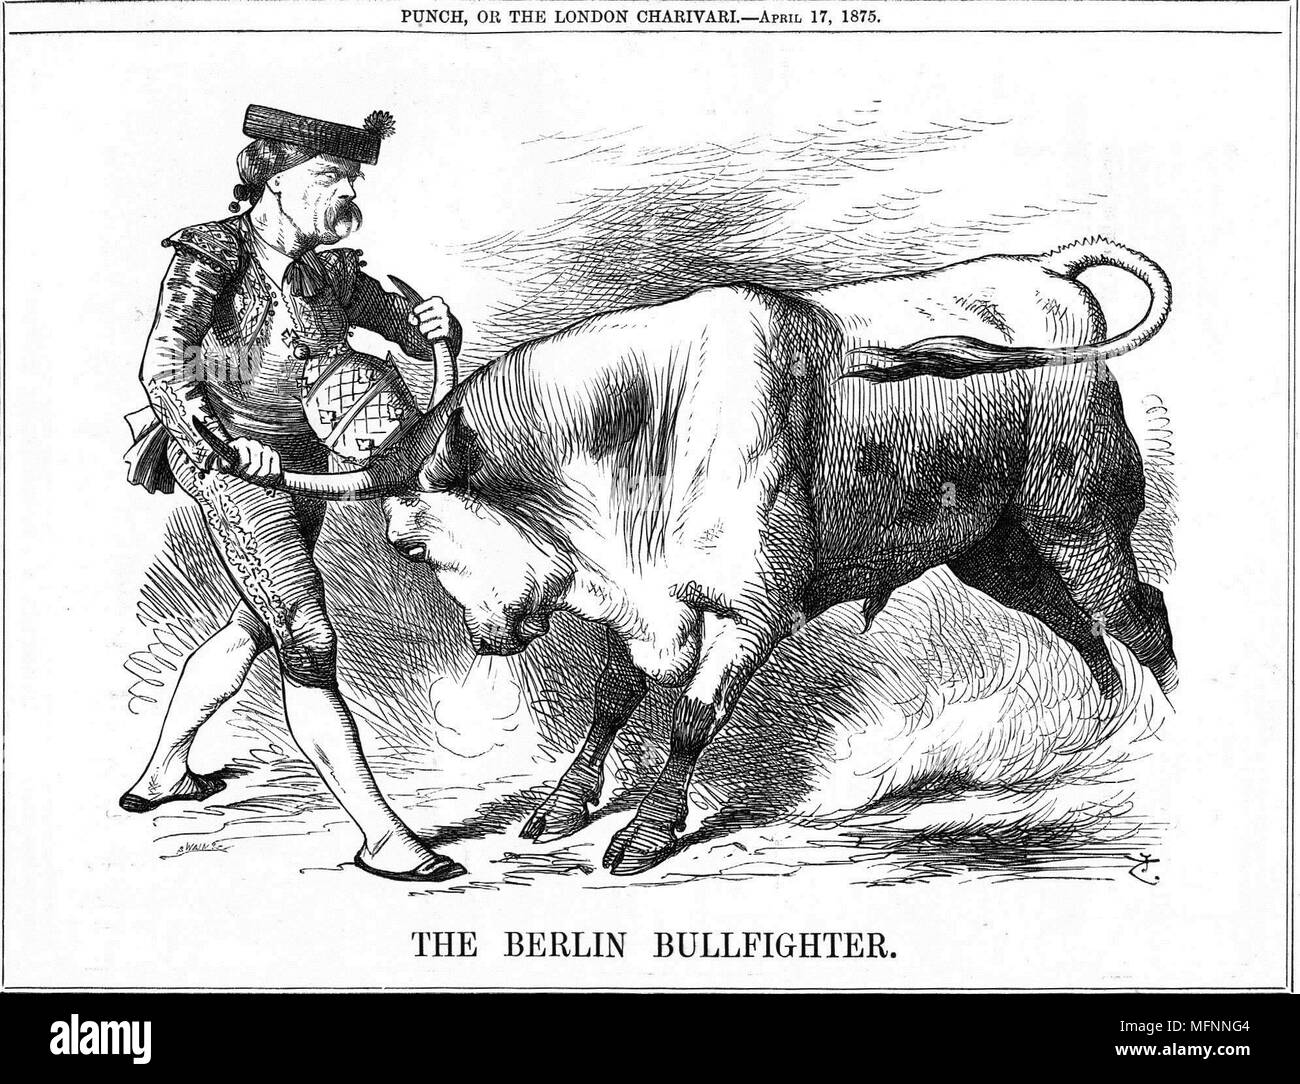 The Berlin Bullfighter' cartoon by John Teniel from 'Punch', London, 17 April 1875, showing the German Chancellor, Otto von Bismarck subduing the Roman Catholic Church in the form of a bull wearing the Papl crown. Stock Photo